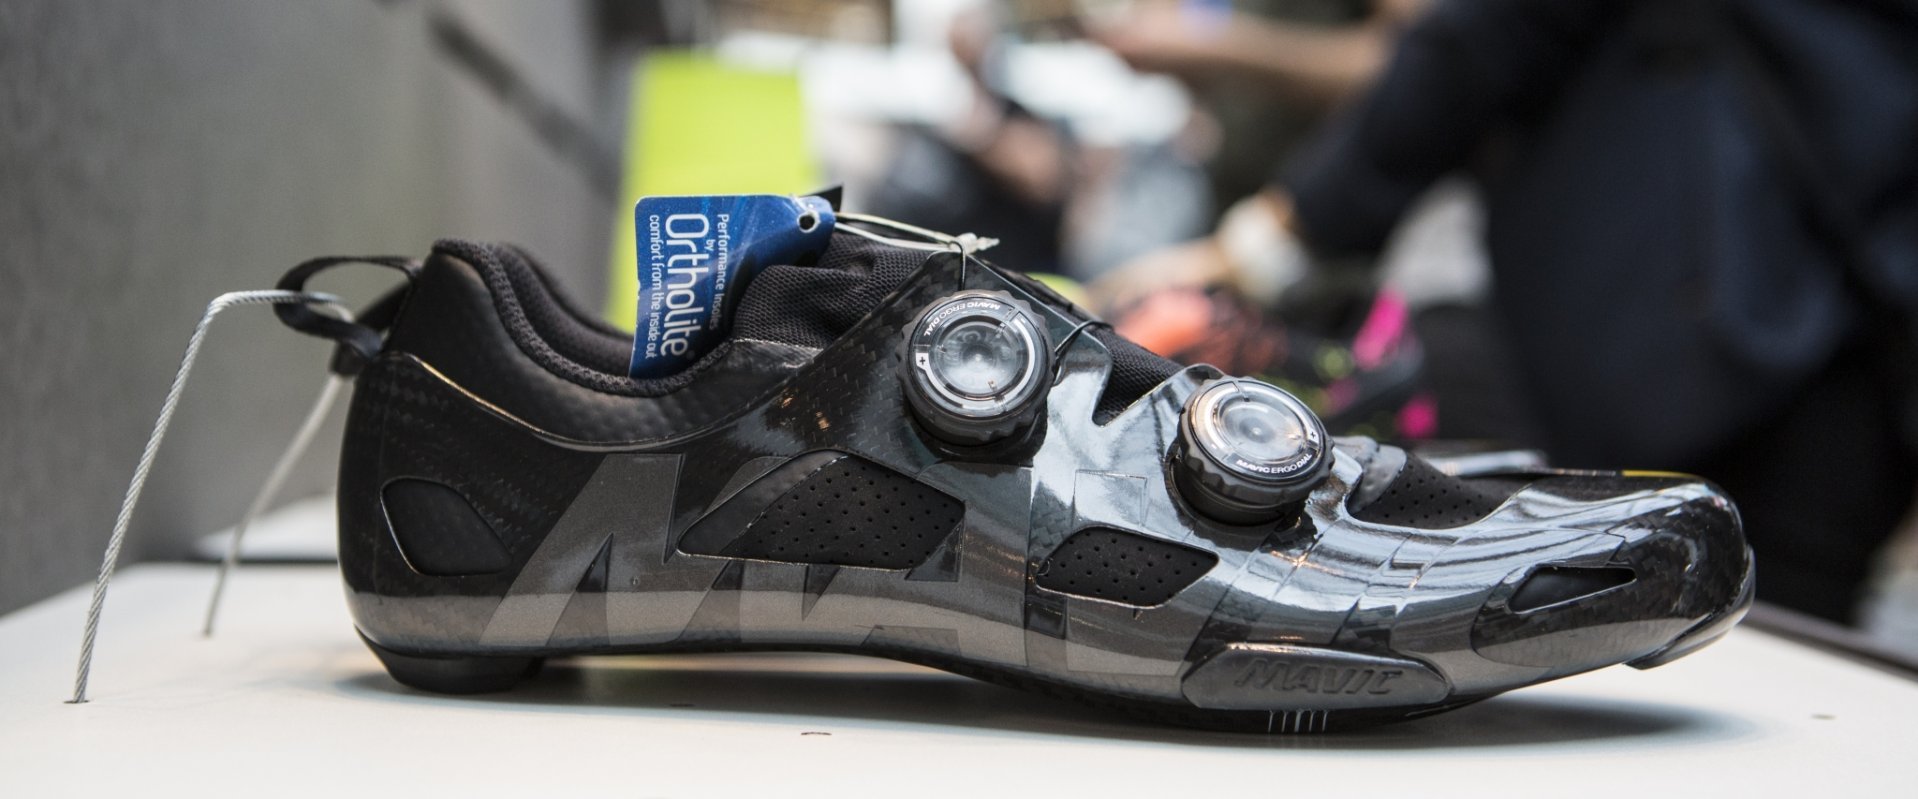 With the Comete, Mavic has taken carbon cycling footwear to perfection.